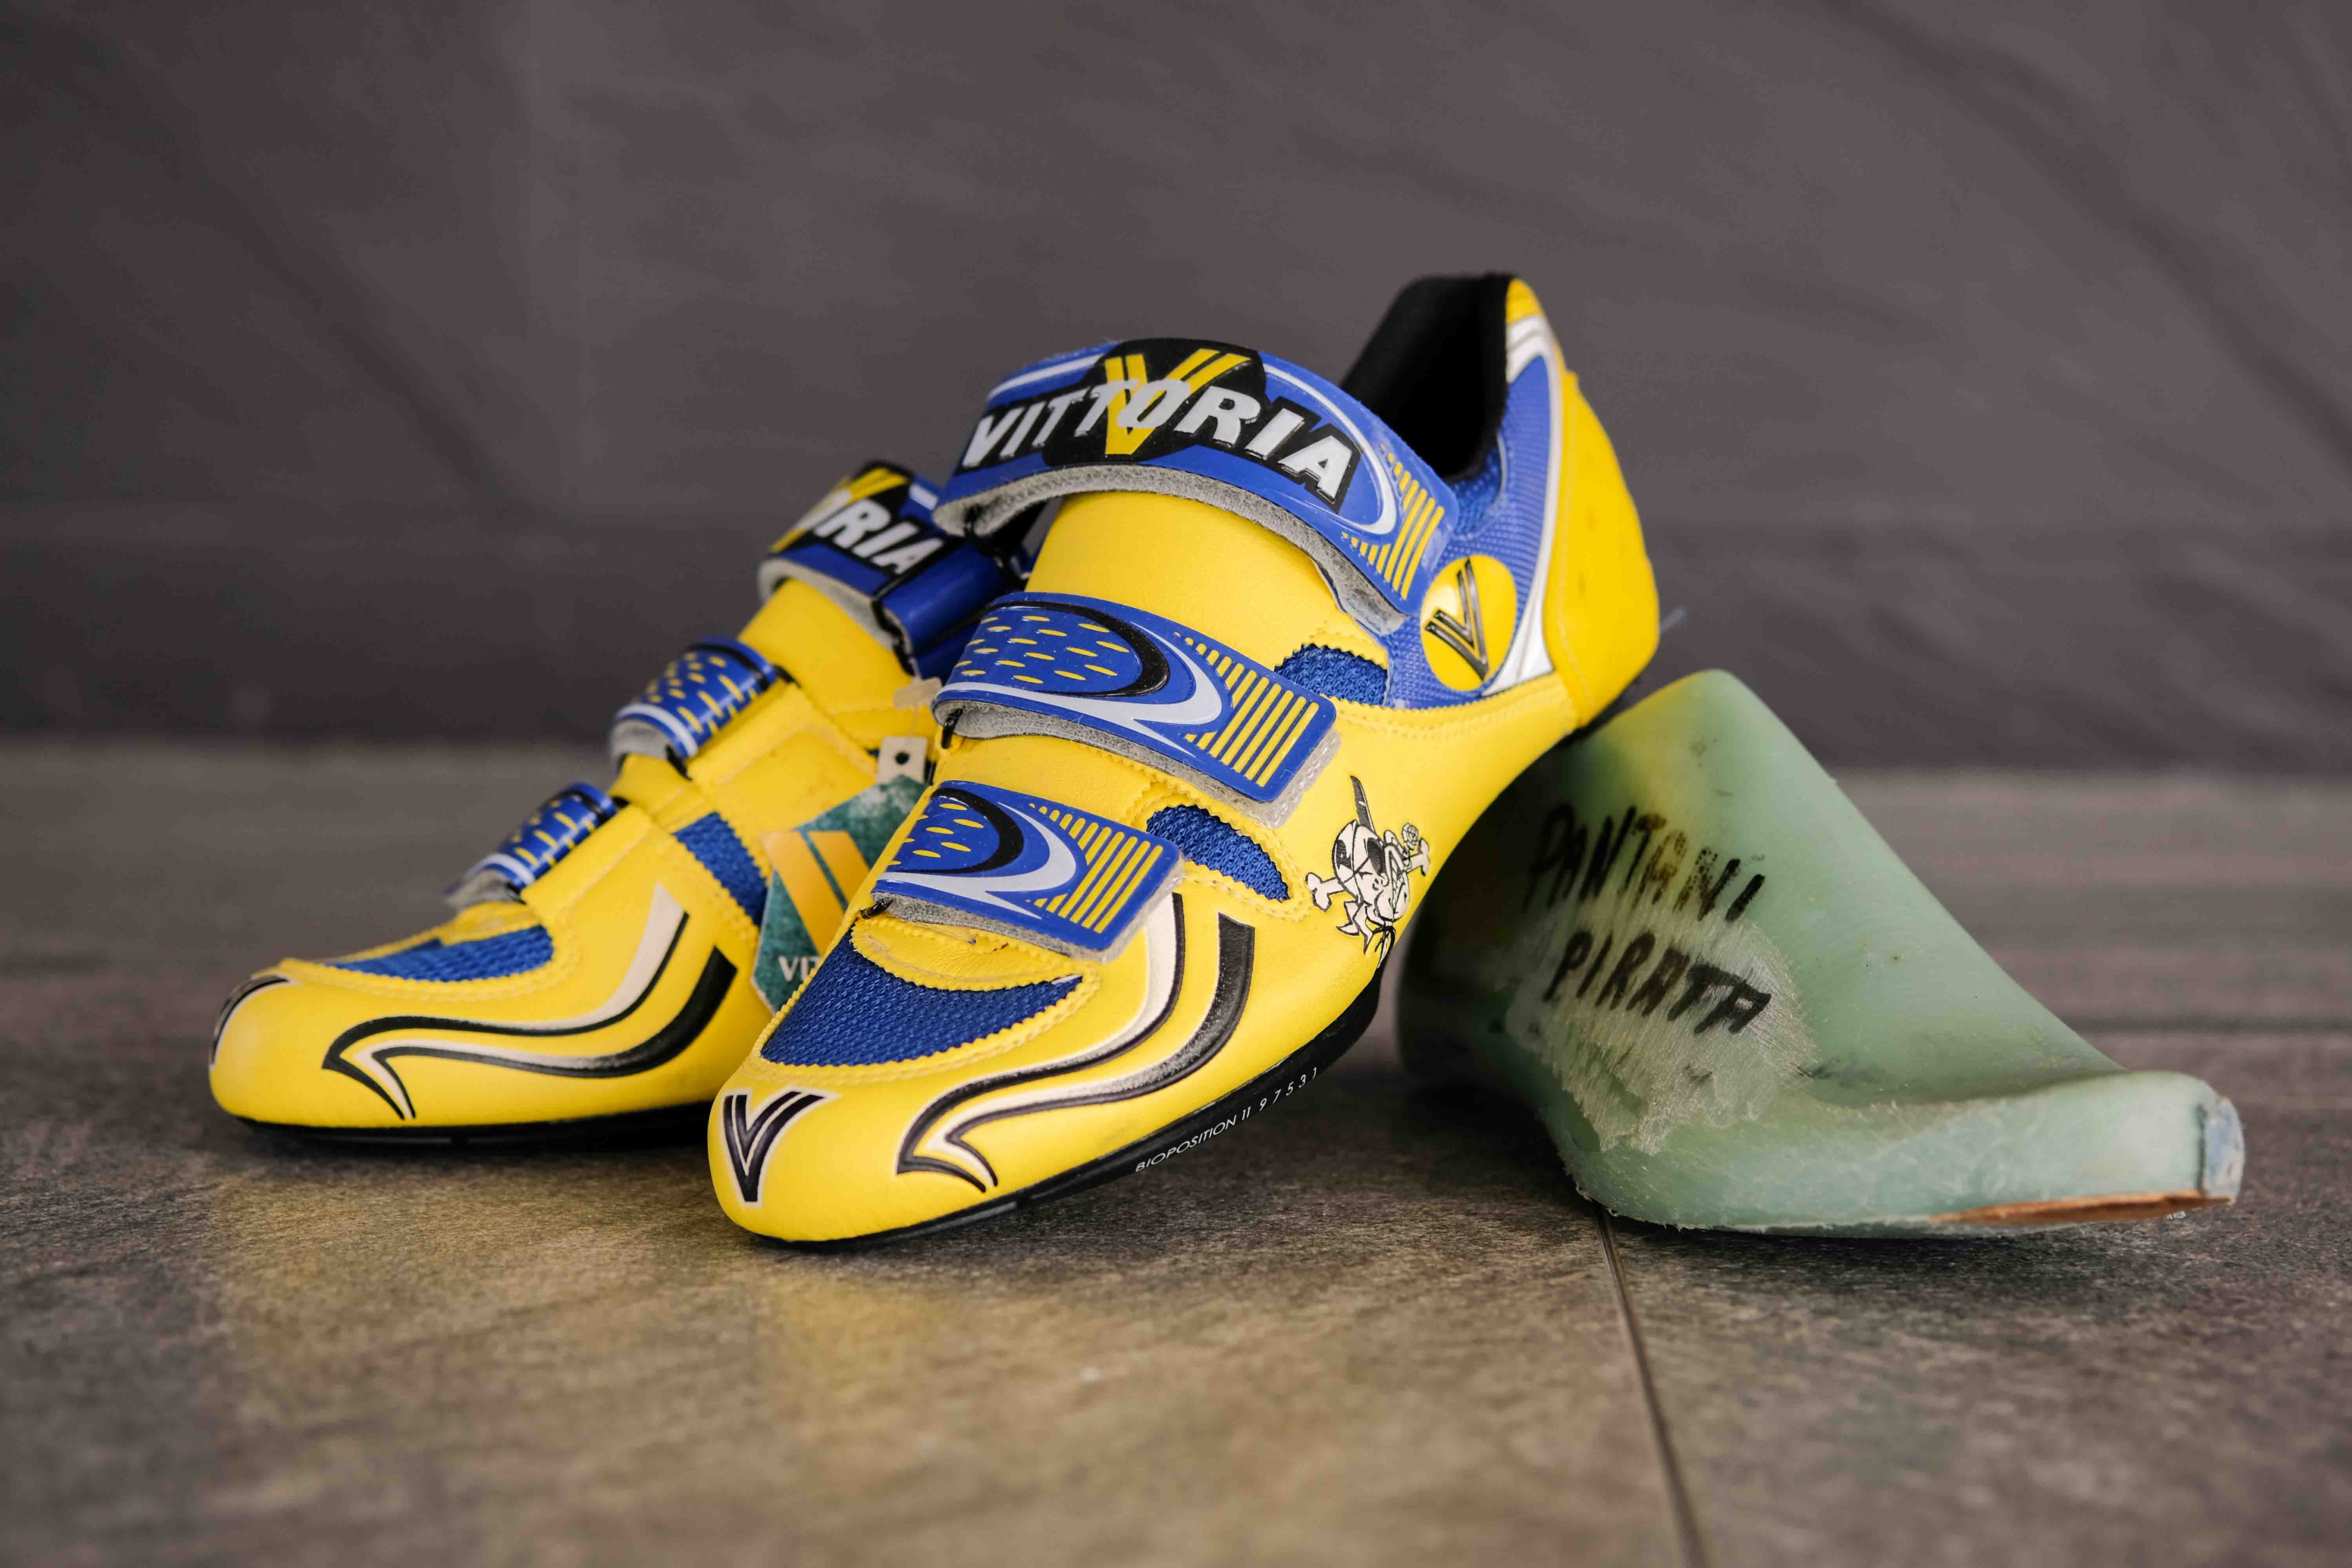 vittoria cycling shoes for sale